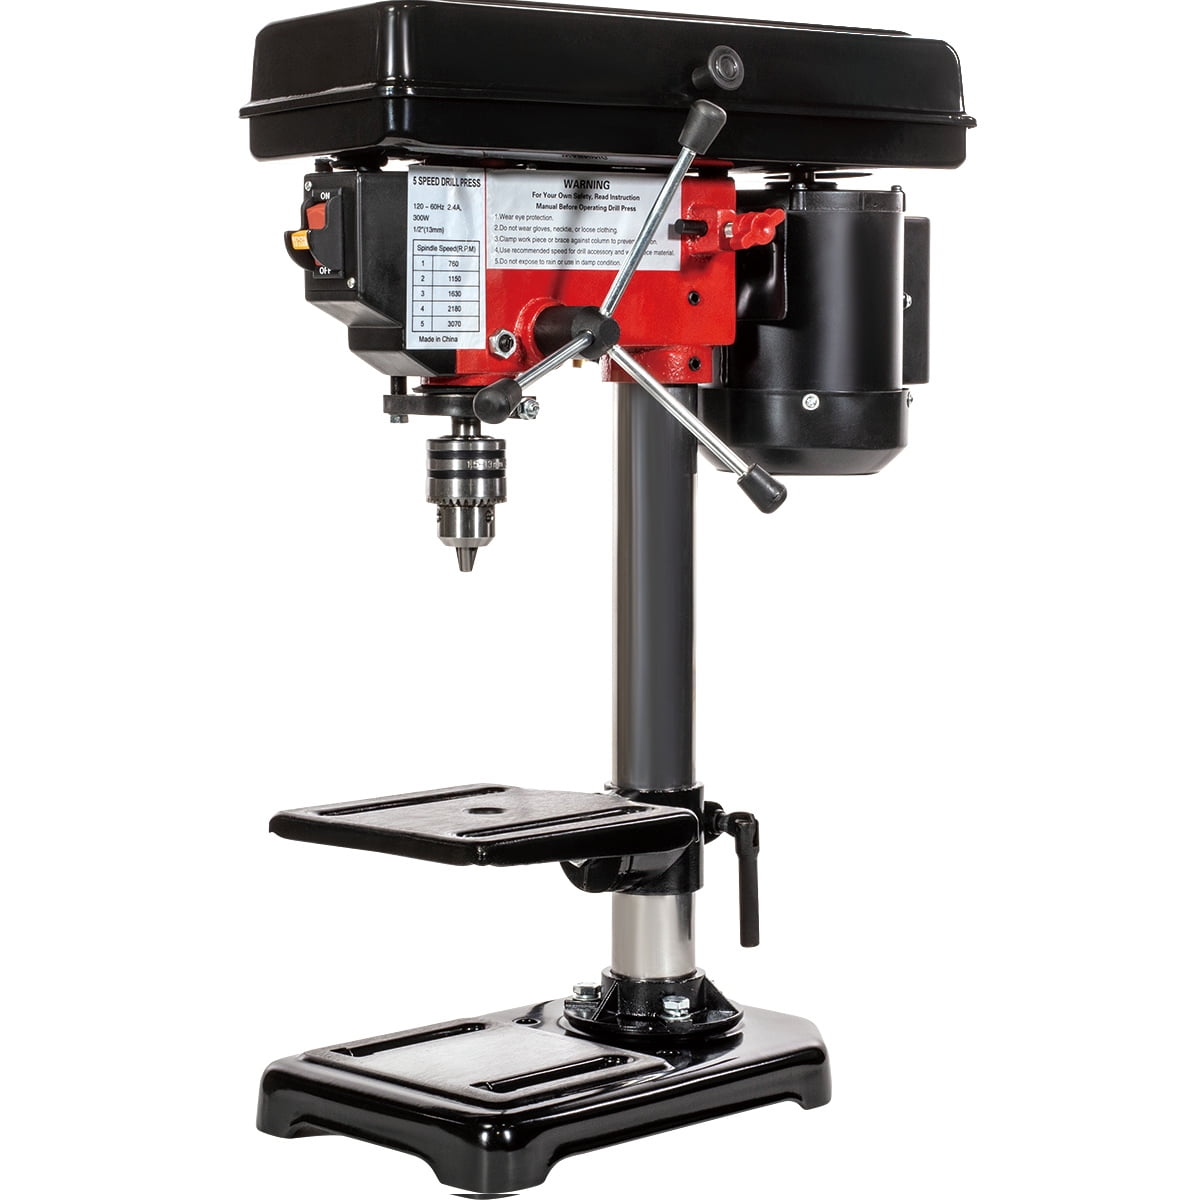 Details about   Ironton Benchtop Drill Press 5-Speed 8in 1/3 HP 